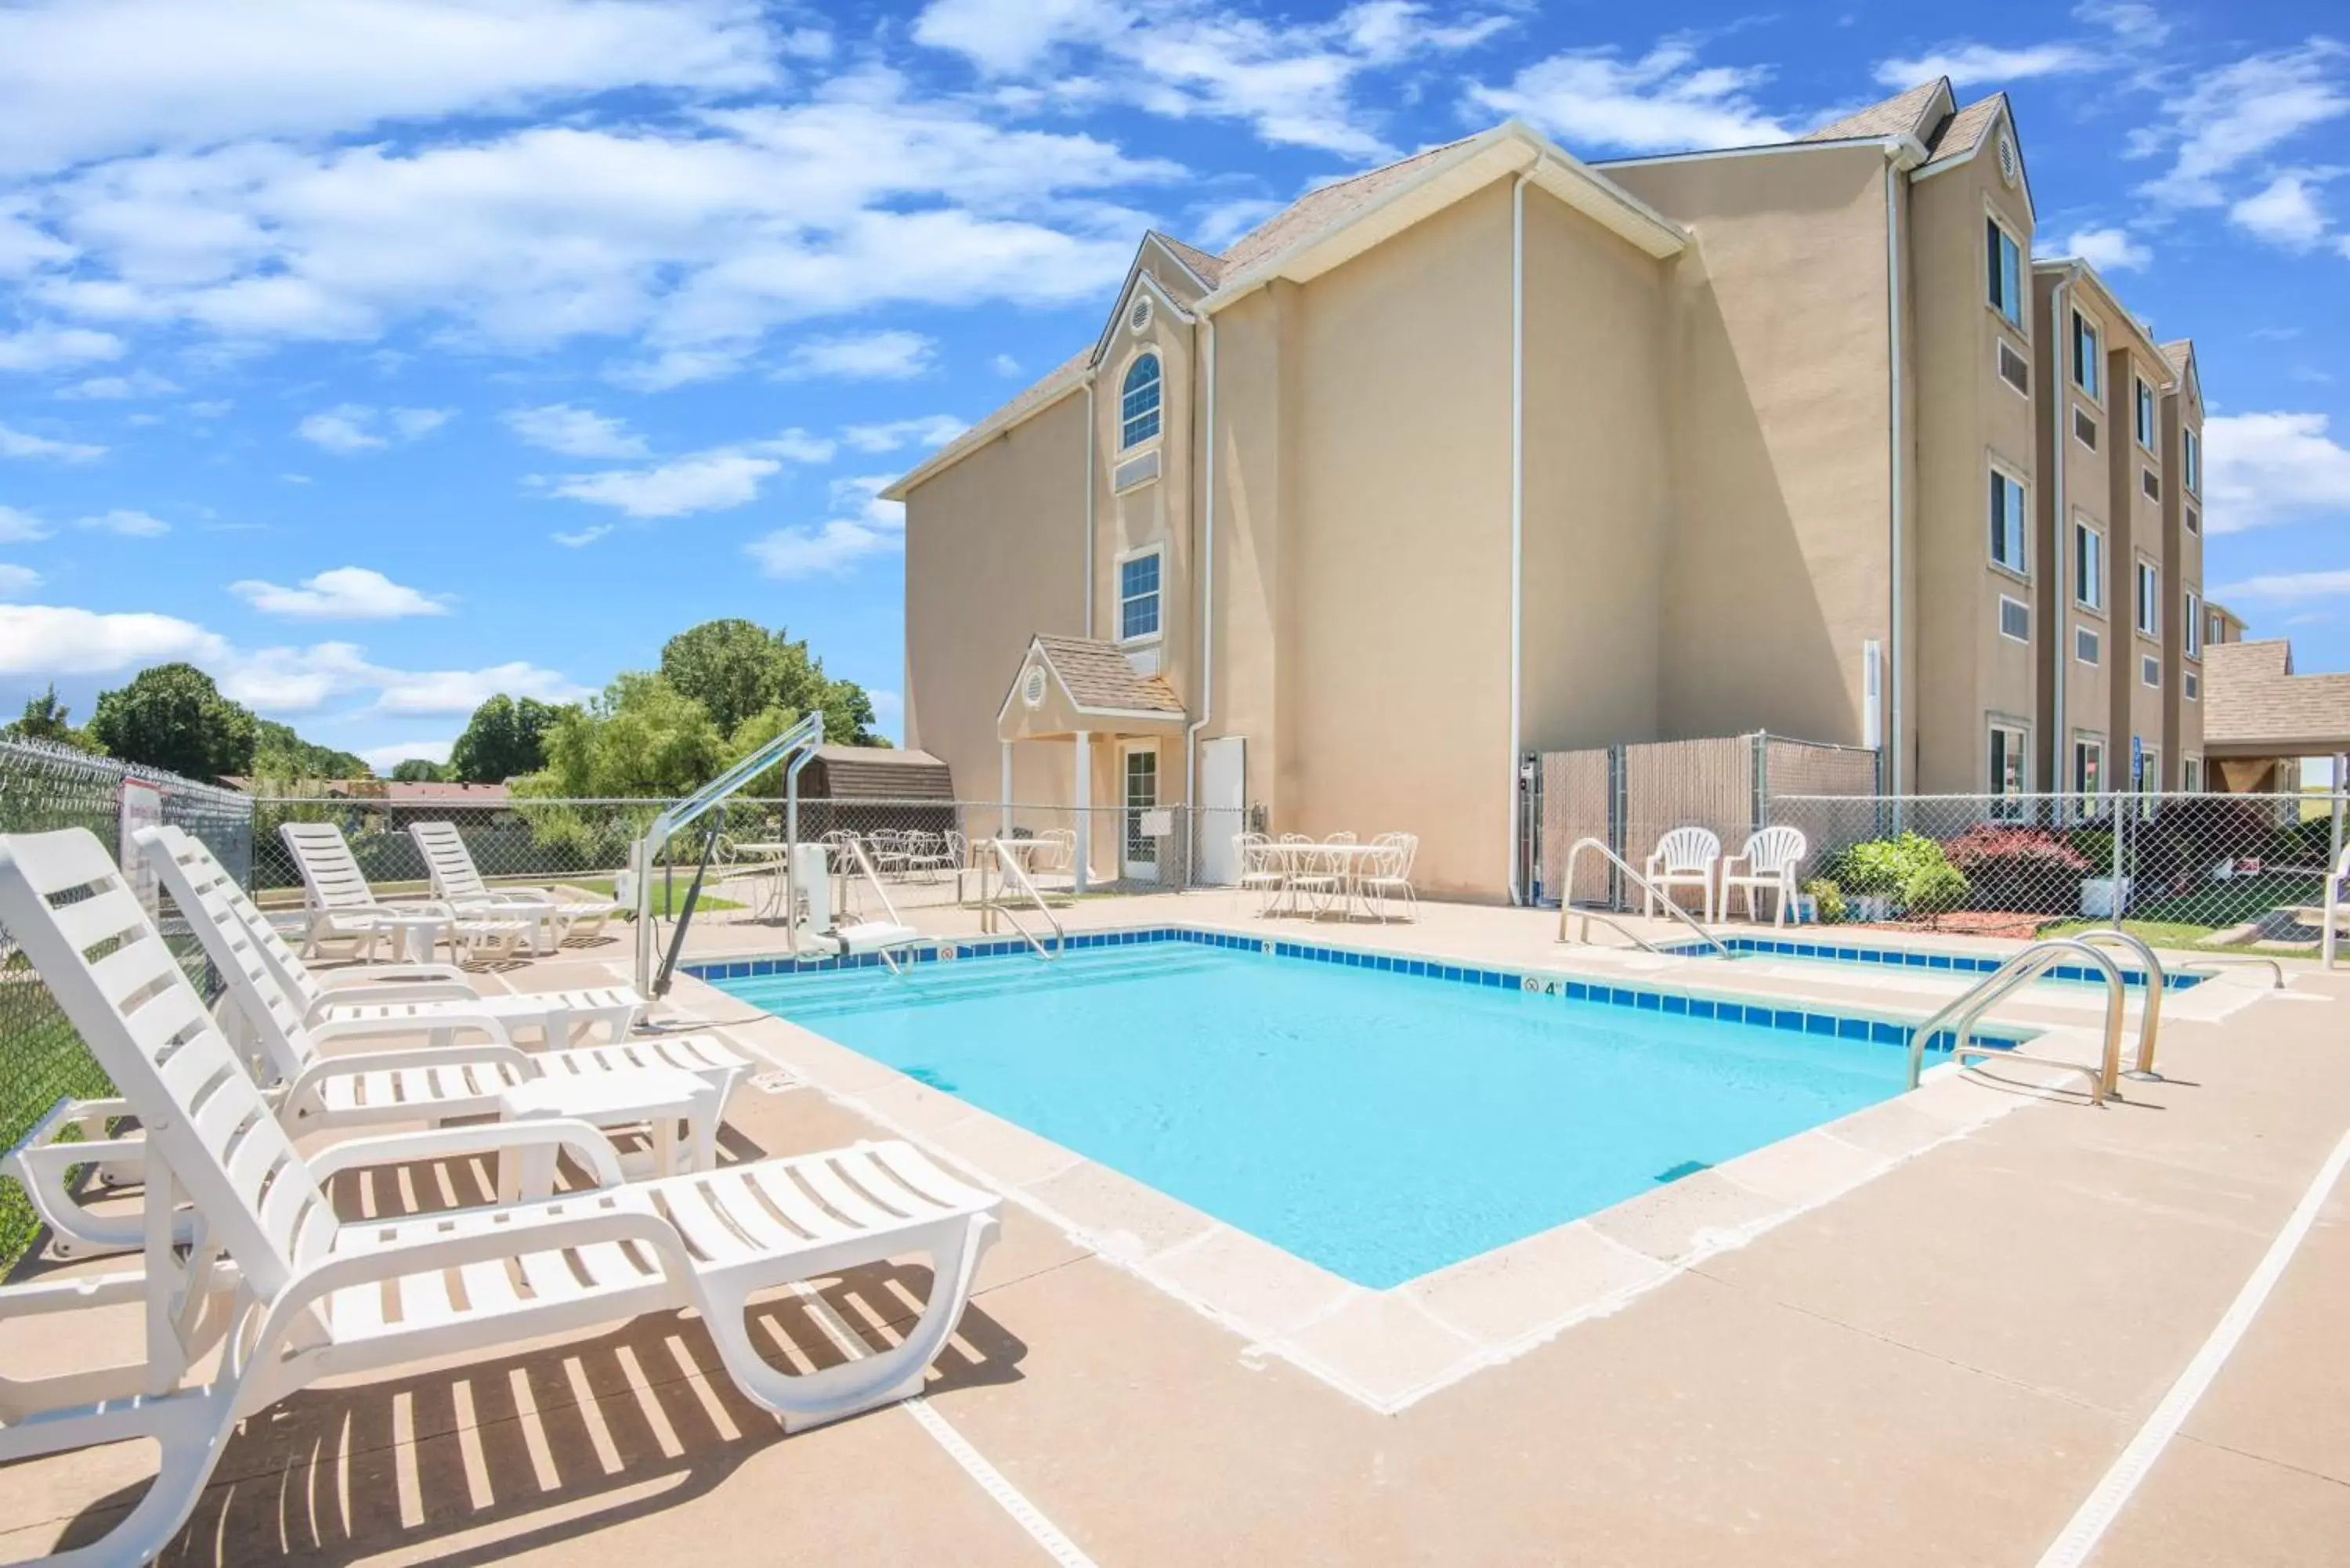 Swimming pool, Property Building in Microtel Inn & Suites Claremore